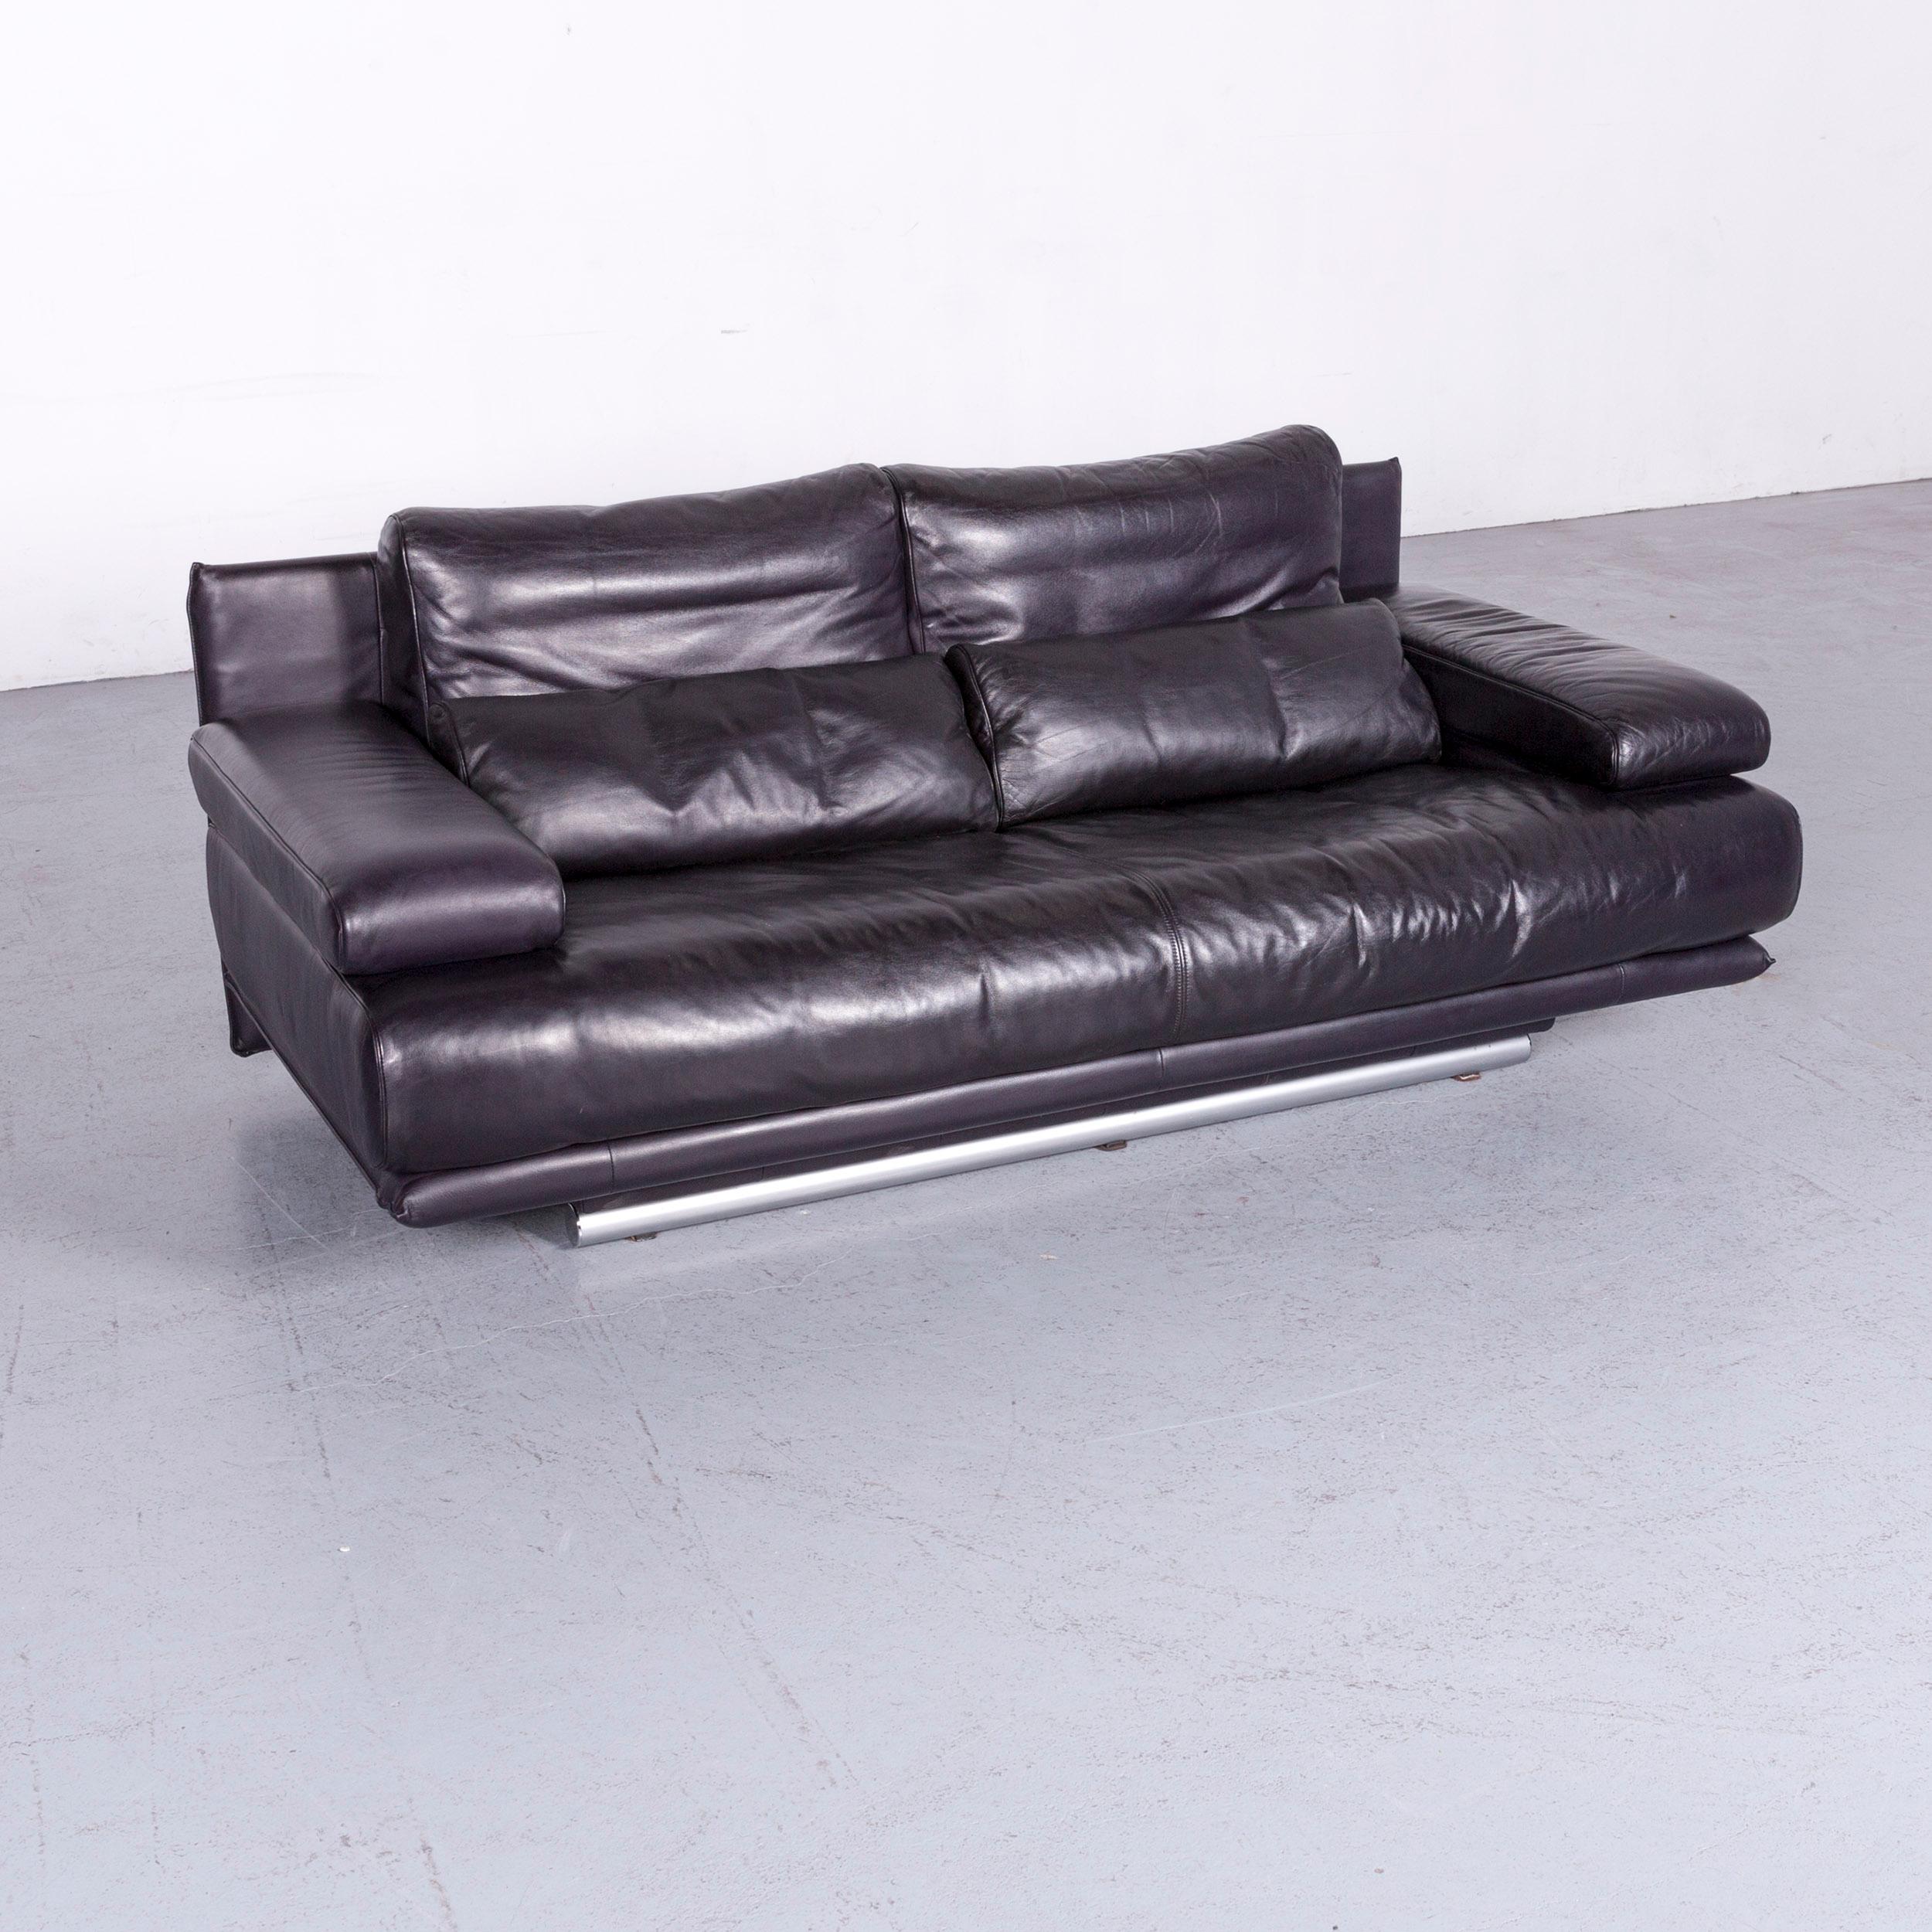 We bring to you a Rolf Benz 6500 designer leather sofa purple genuine leather two-seat couch.
 

Product measures in centimeters:

Depth: 90
Width: 185
Height: 75
Seat-height: 40
Rest-height: 50
Seat-depth: 45
Seat-width: